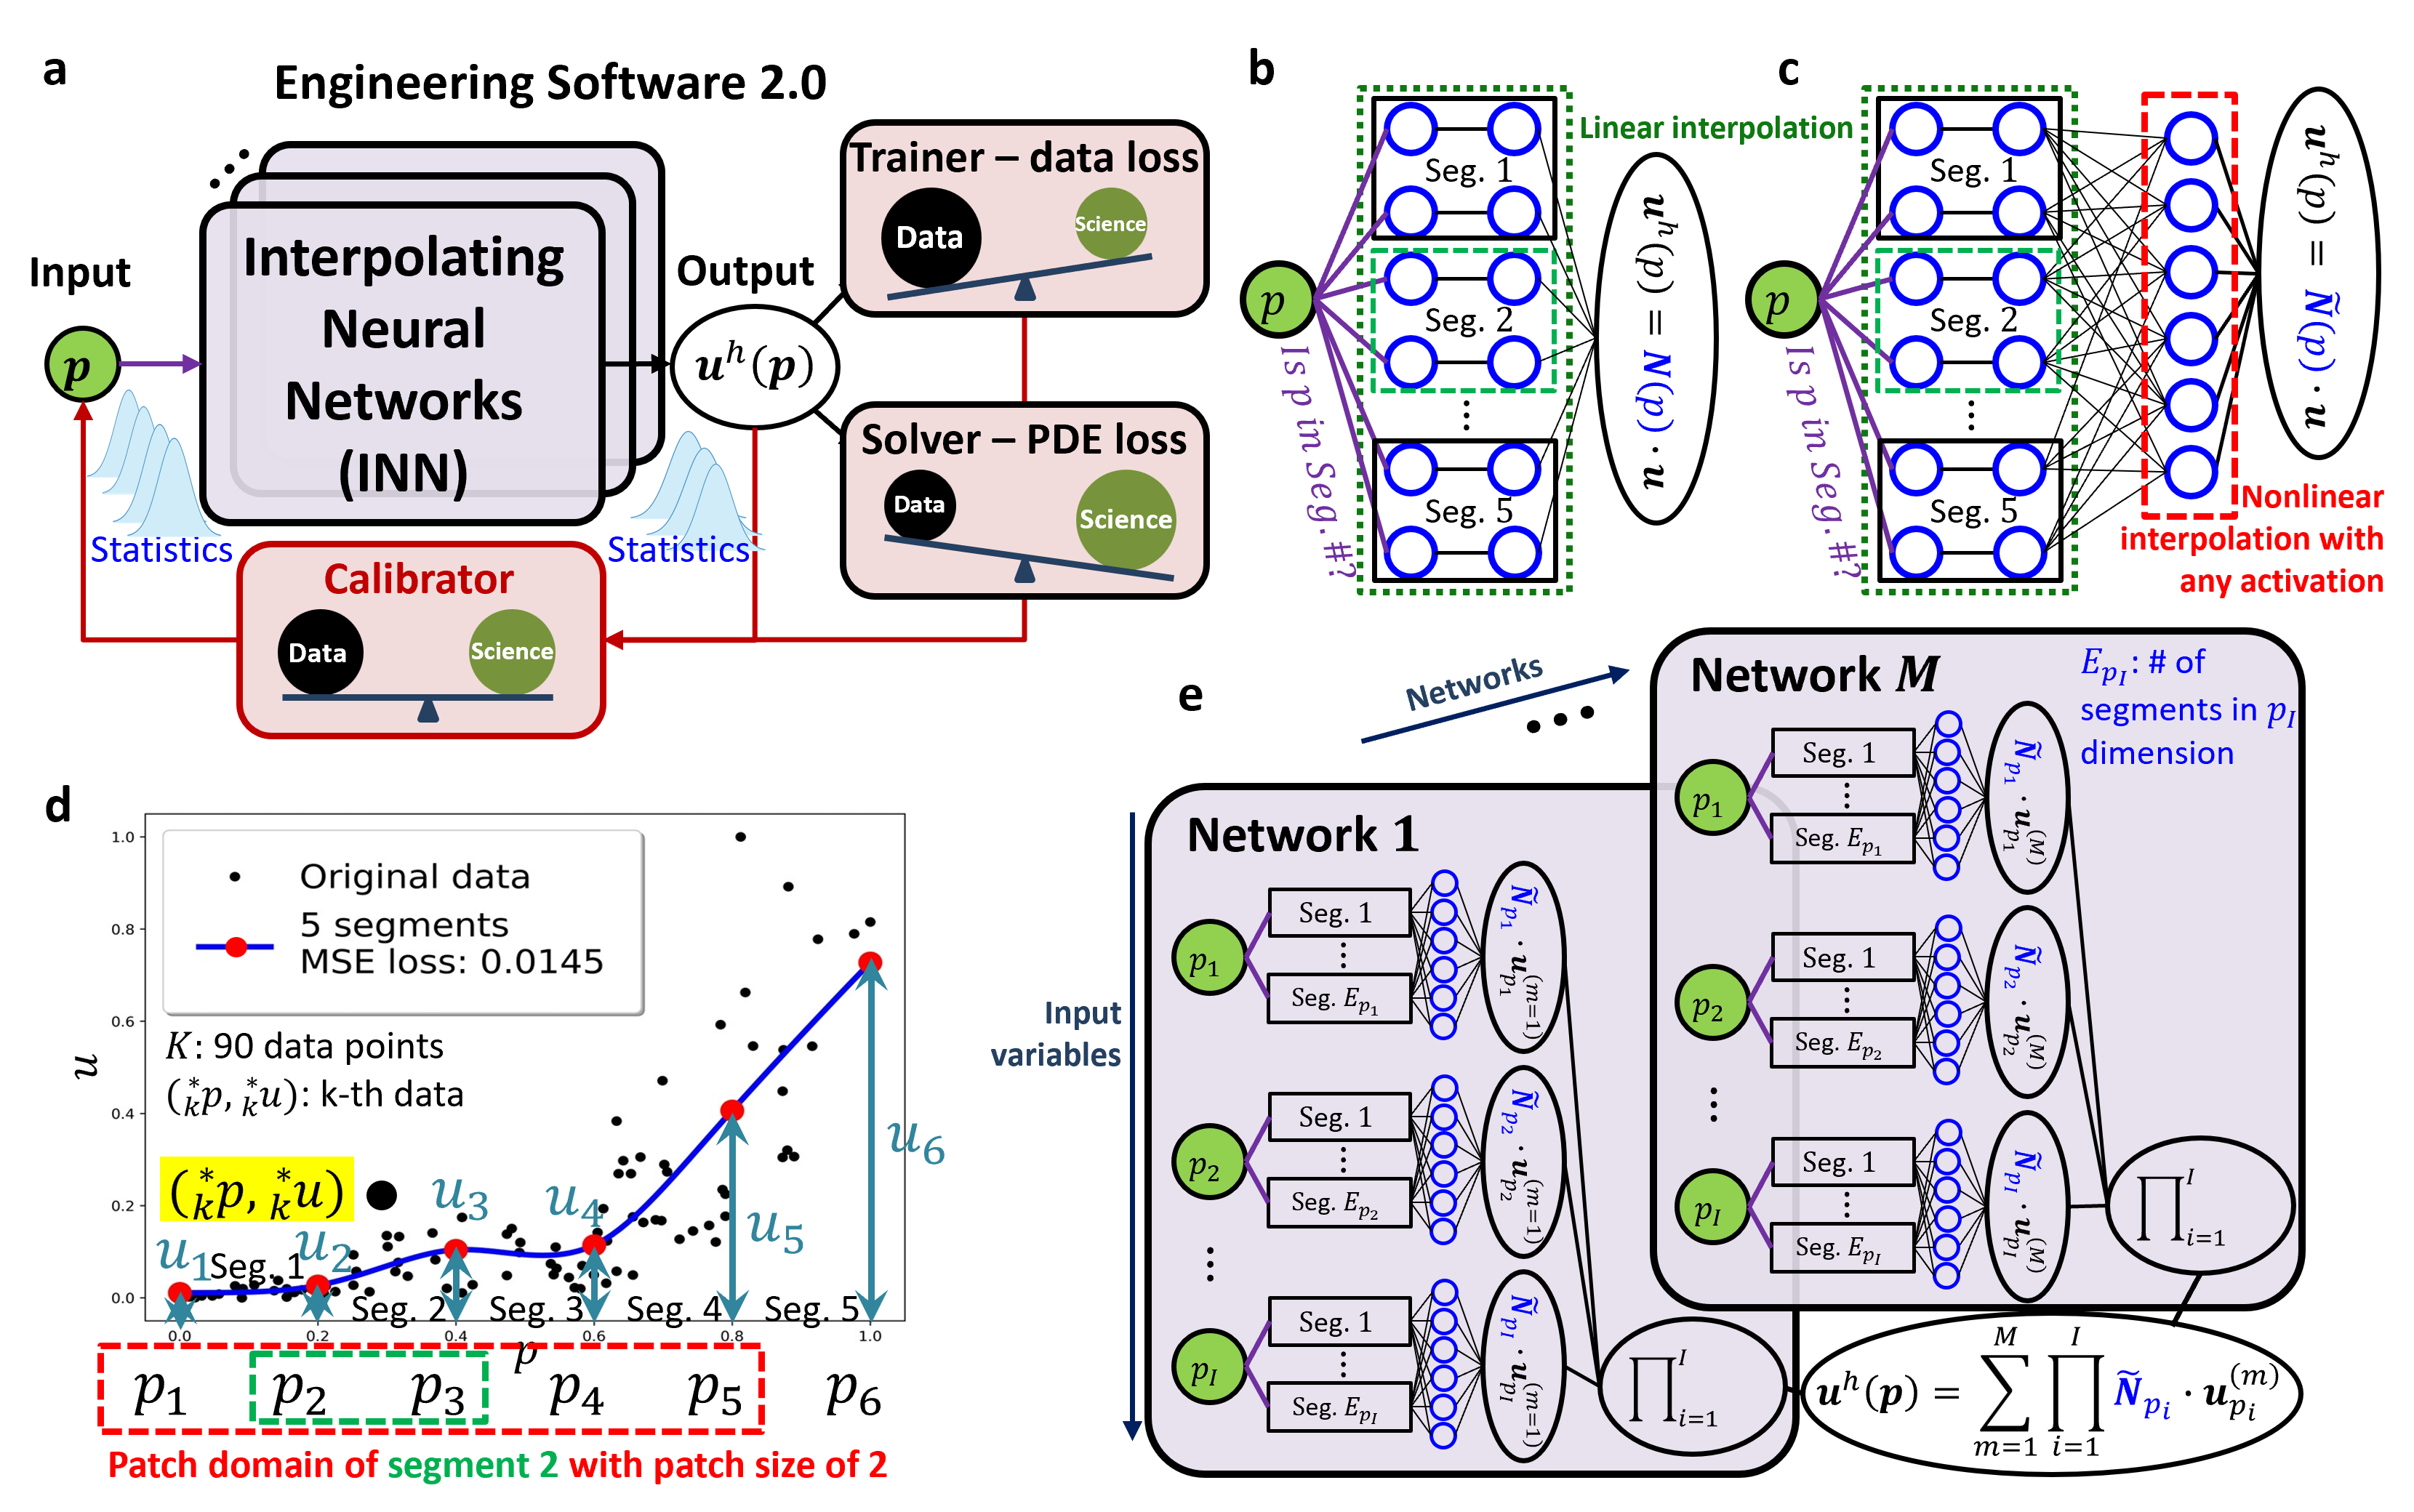 Engineering software 2.0 by interpolating neural networks: unifying training, solving, and calibration